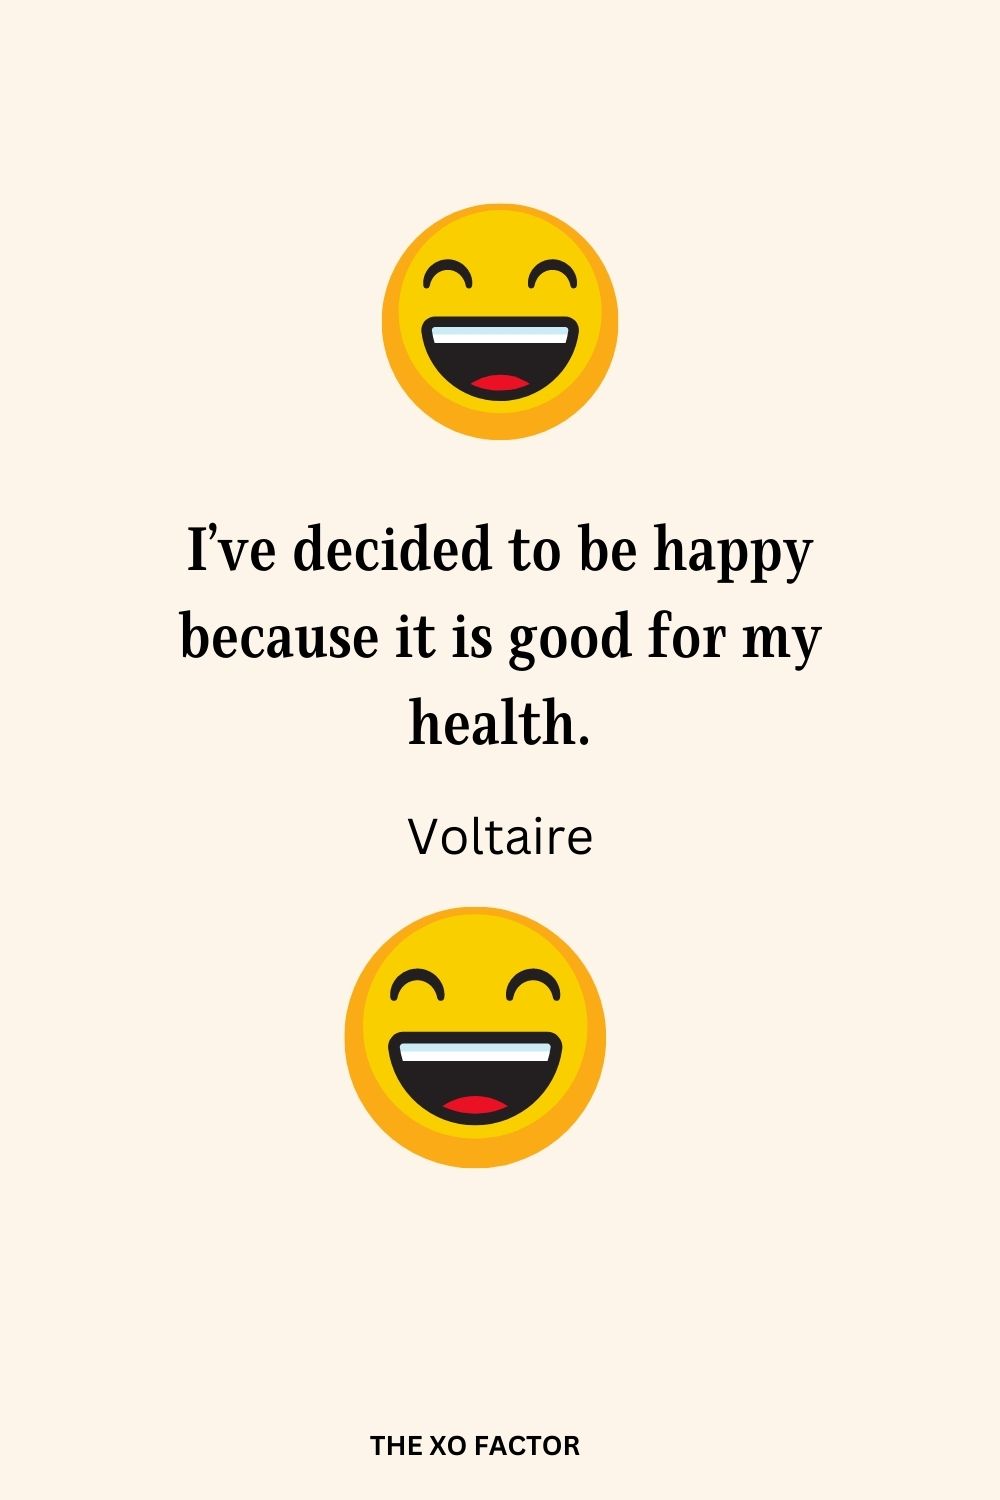 I’ve decided to be happy because it is good for my health.
Voltaire